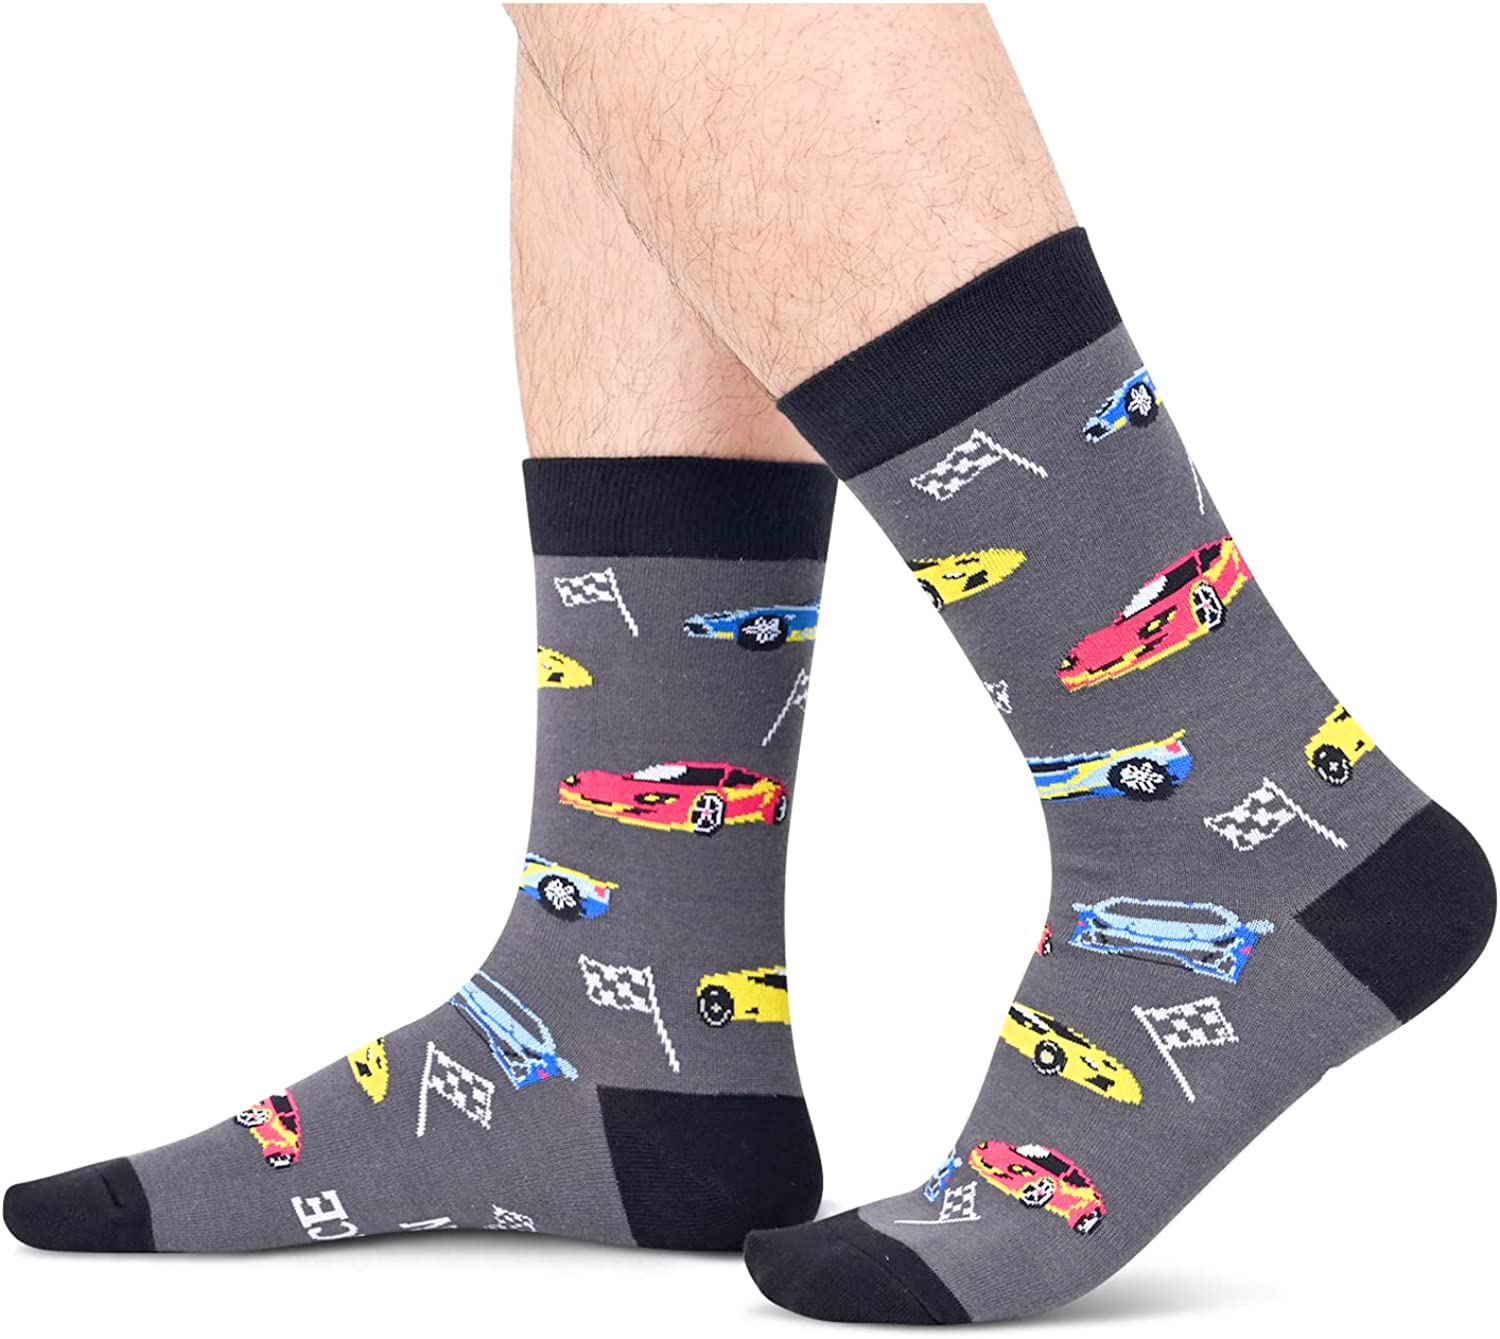 Zmart Car Guy Gifts, Funny Gifts For Car Lovers, Racing Car Gifts For Men, Drag Racing Gifts For Men, Cool Vintage Race Car Socks